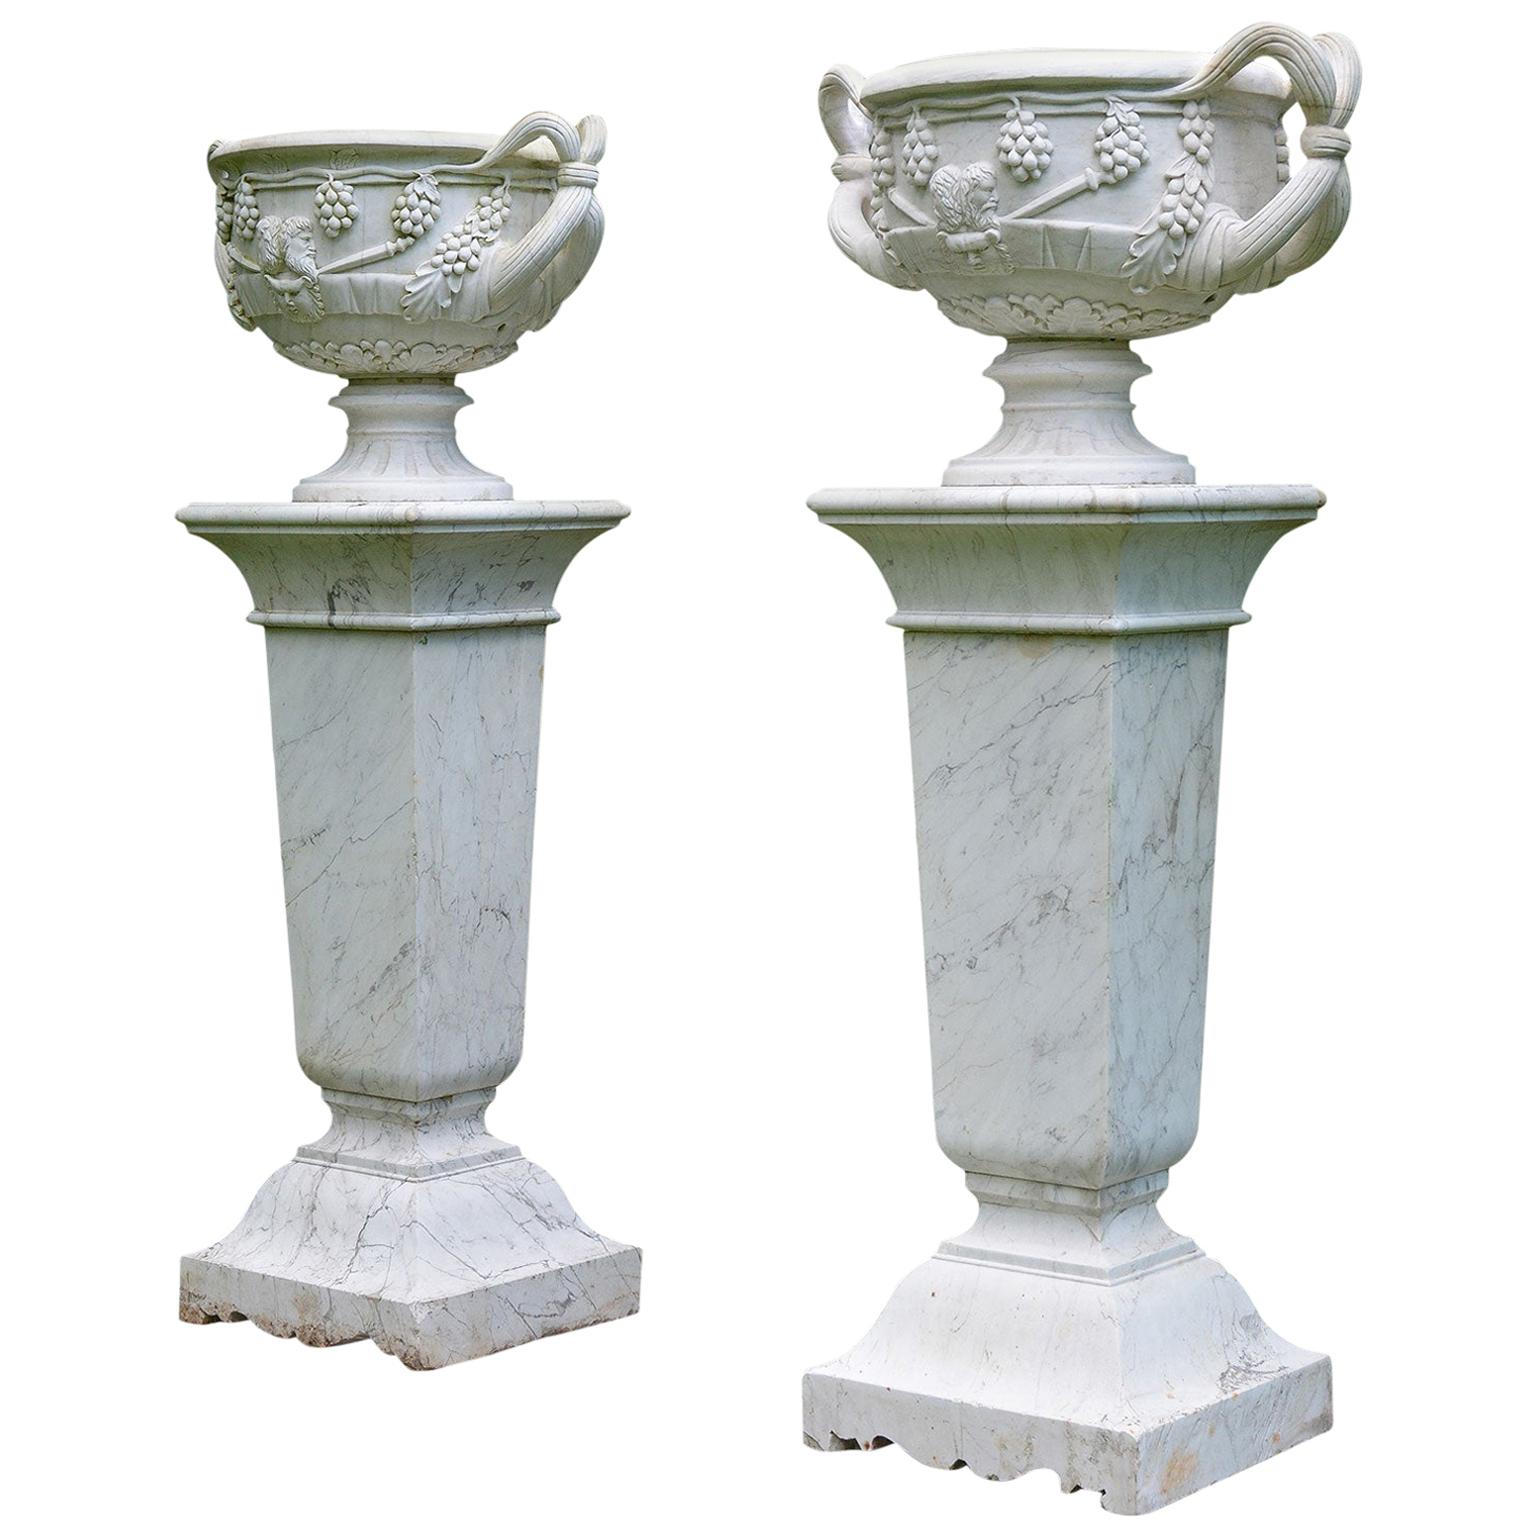 A pair of carved marble urns, each with double-looped handles, the urn body with portrait busts and grapevines, the motifs and overall shape of the urns inspired by the Warwick Vase, an ancient Roman urn discovered at Hadrian’s Villa, in Tivoli,